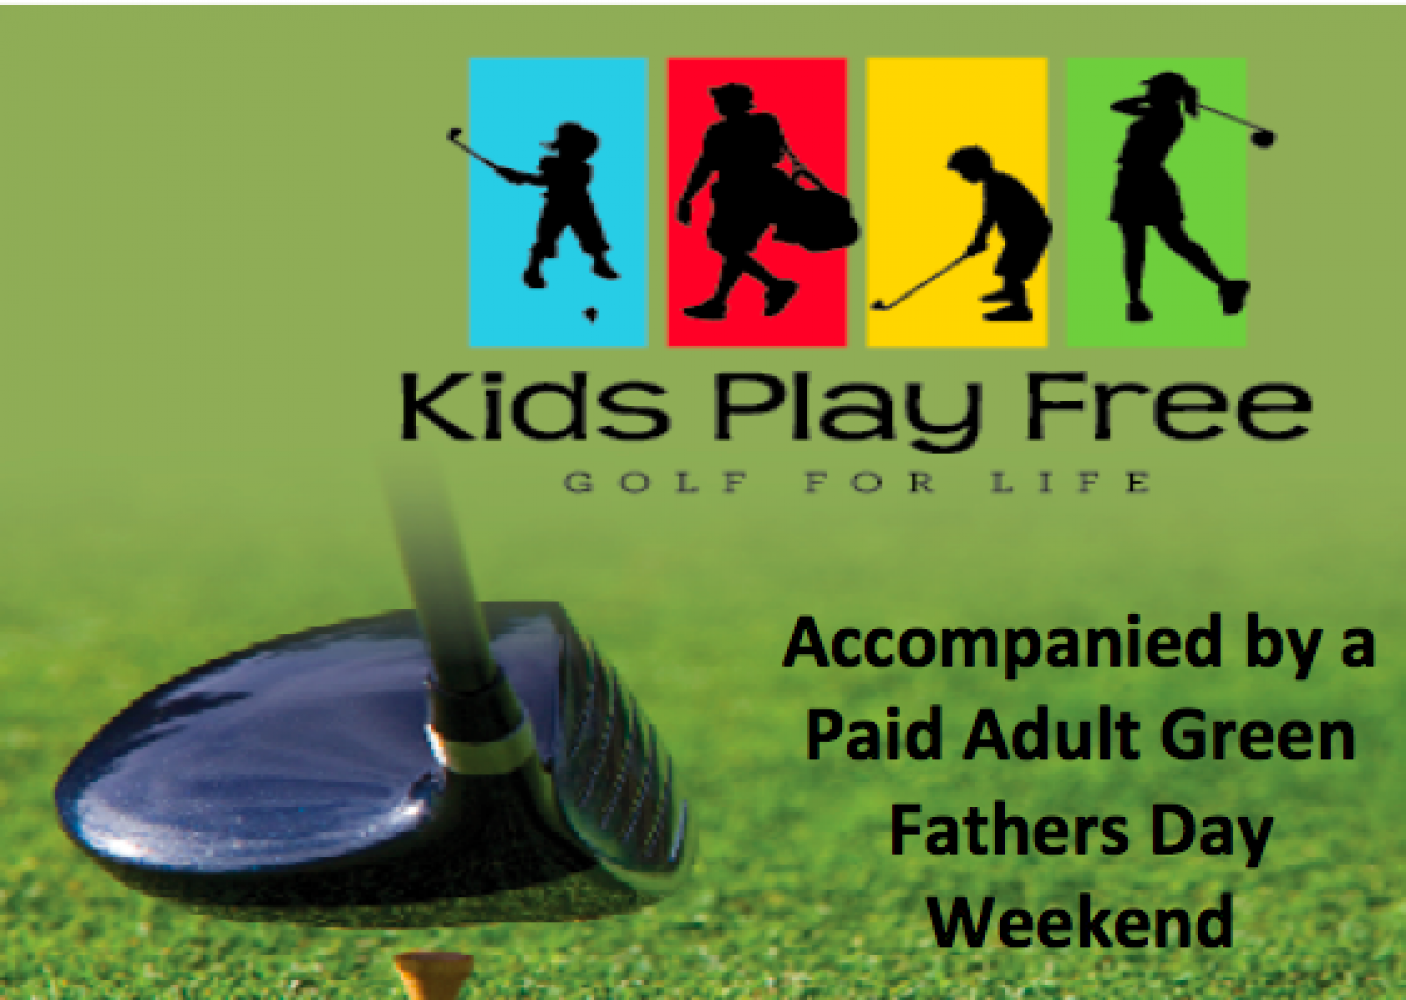 Kids Golf FREE Father's Day Weekend